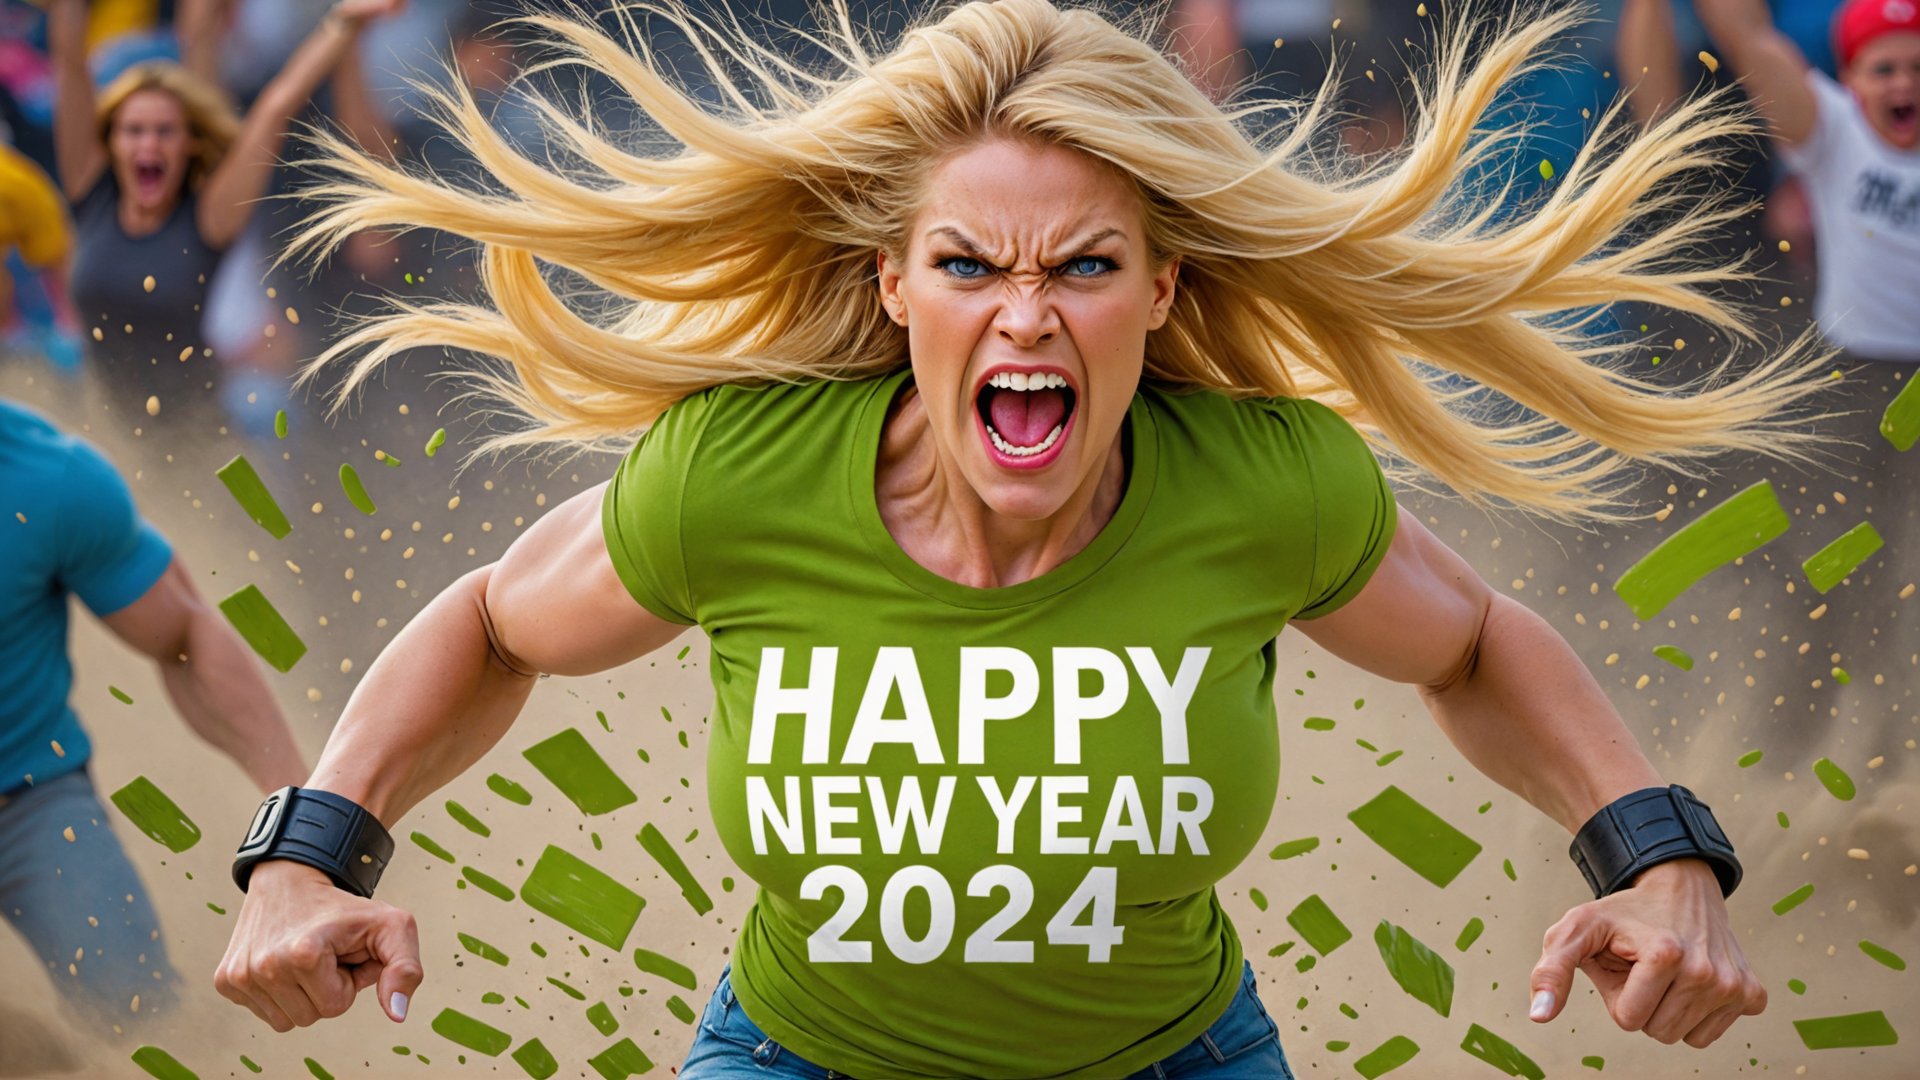 angry KAREN beautiful SUPERMODEL woman,  "HAPPY NEW YEAR 2024" t-shirt logo,  BLONDE hair,  SEXY,  turning into incredible hulk mad, ACTION SHOT, ACTION,<lora:EMS-251568-EMS:0.800000>